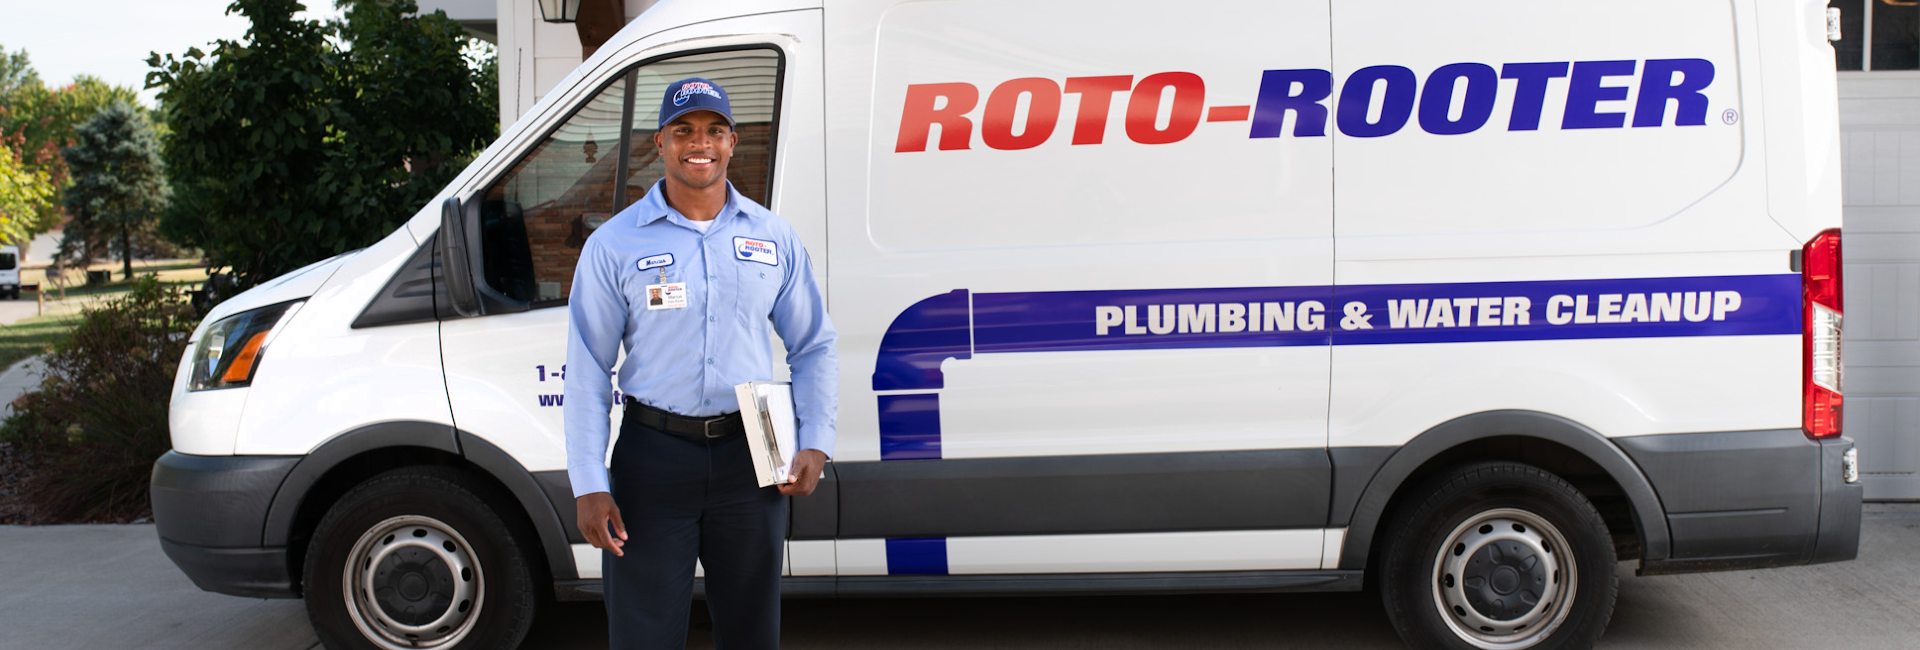 Roto-Rooter Plumbing & Water Cleanup 5